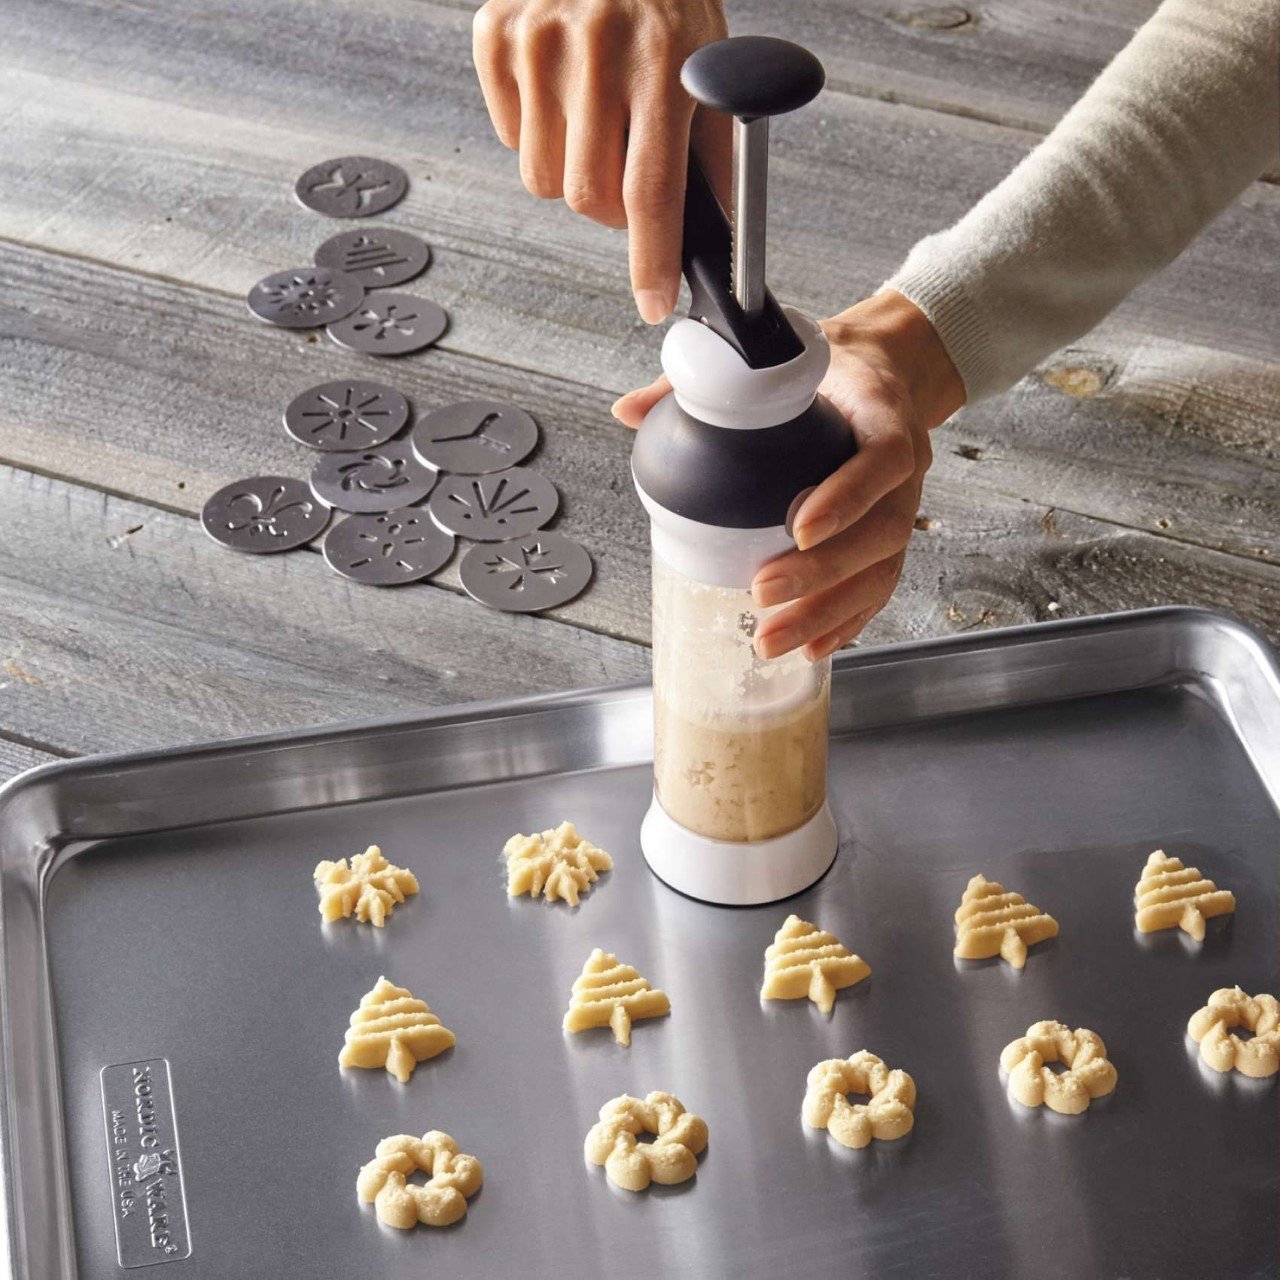 https://www.yankodesign.com/images/design_news/2021/12/the-oxo-cookie-press-lets-you-easily-pump-out-a-whole-bunch-of-perfectly-shaped-holiday-themed-cookies/oxo_cookie_press_2021_2.jpg